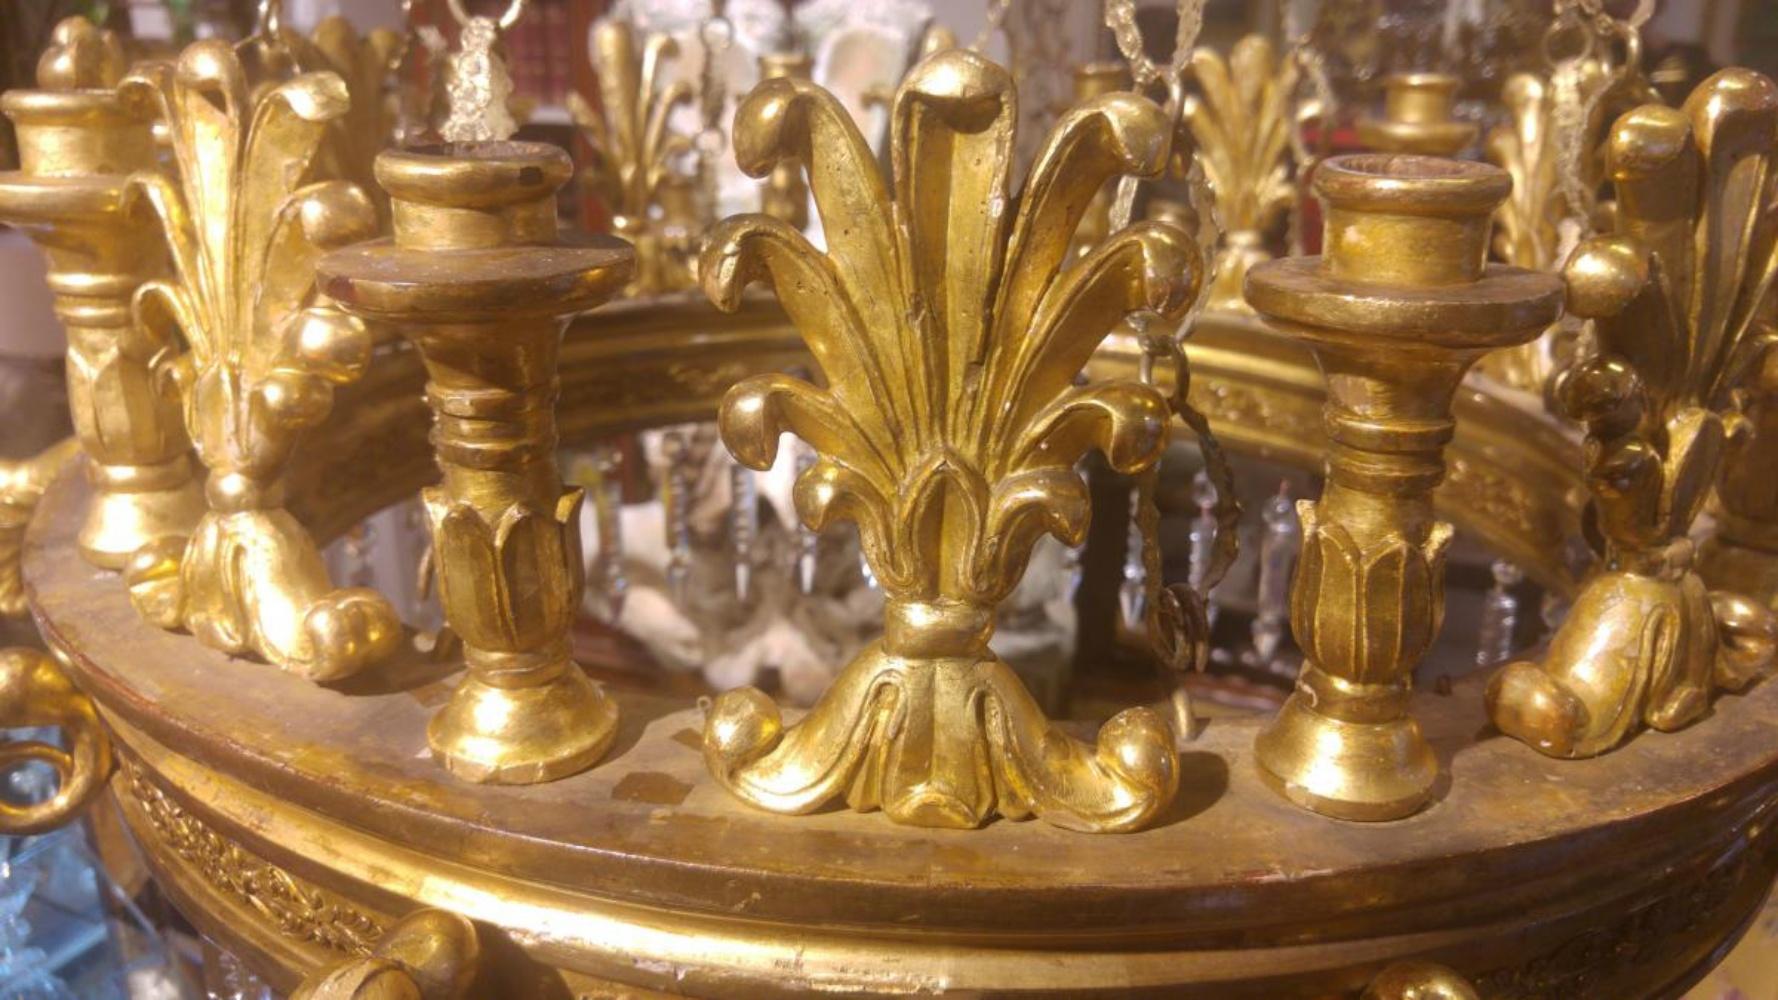 Rococo Exceptional Carved and Gilded Wooden Lamp from the Carlos IV Period 18th Century For Sale